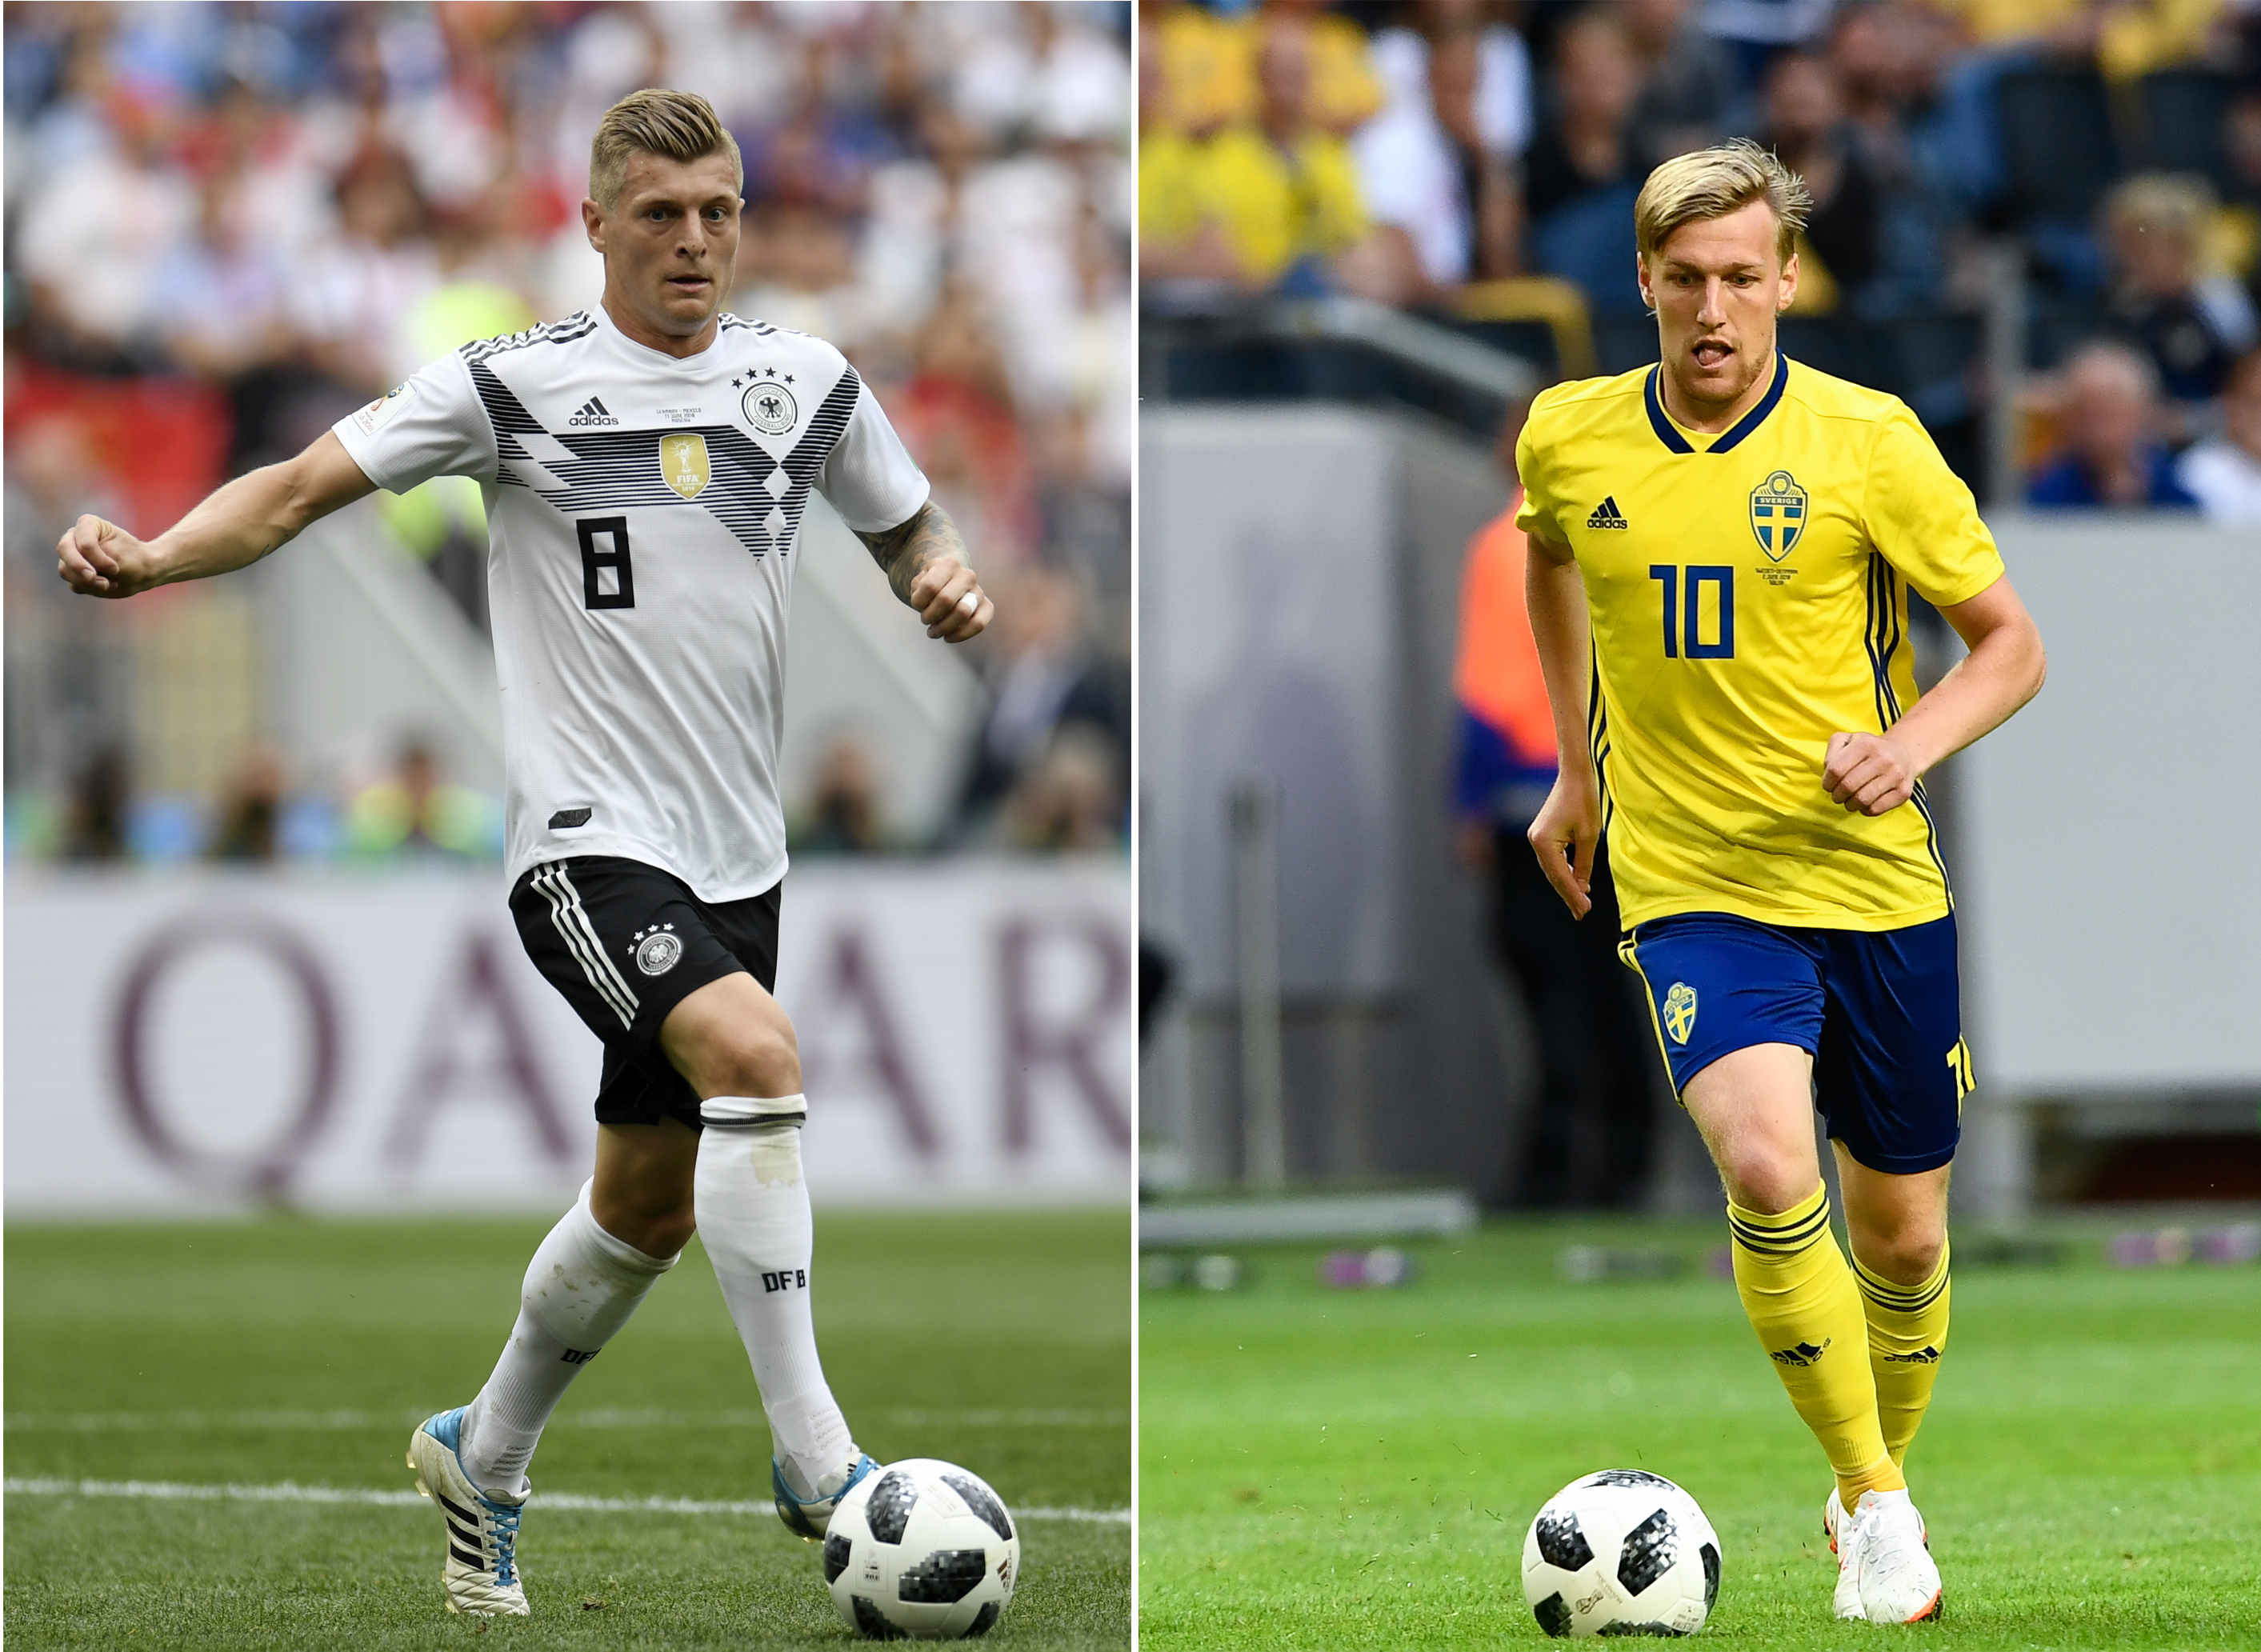 (COMBO)  This combination of photos created on June 21, 2018 shows Germany's midfielder Toni Kroos in Moscow on June 17, 2018 (L) and Sweden's midfielder Emil Forsberg in Solna on June 2, 2018. - Germany will play Sweden in their Russia 2018 World Cup Group F football match at the Fisht Stadium in Sochi on June 23, 2018. (Photo by Patrik STOLLARZ and Jonathan NACKSTRAND / AFP)        (Photo credit should read PATRIK STOLLARZ,JONATHAN NACKSTRAND/AFP/Getty Images)